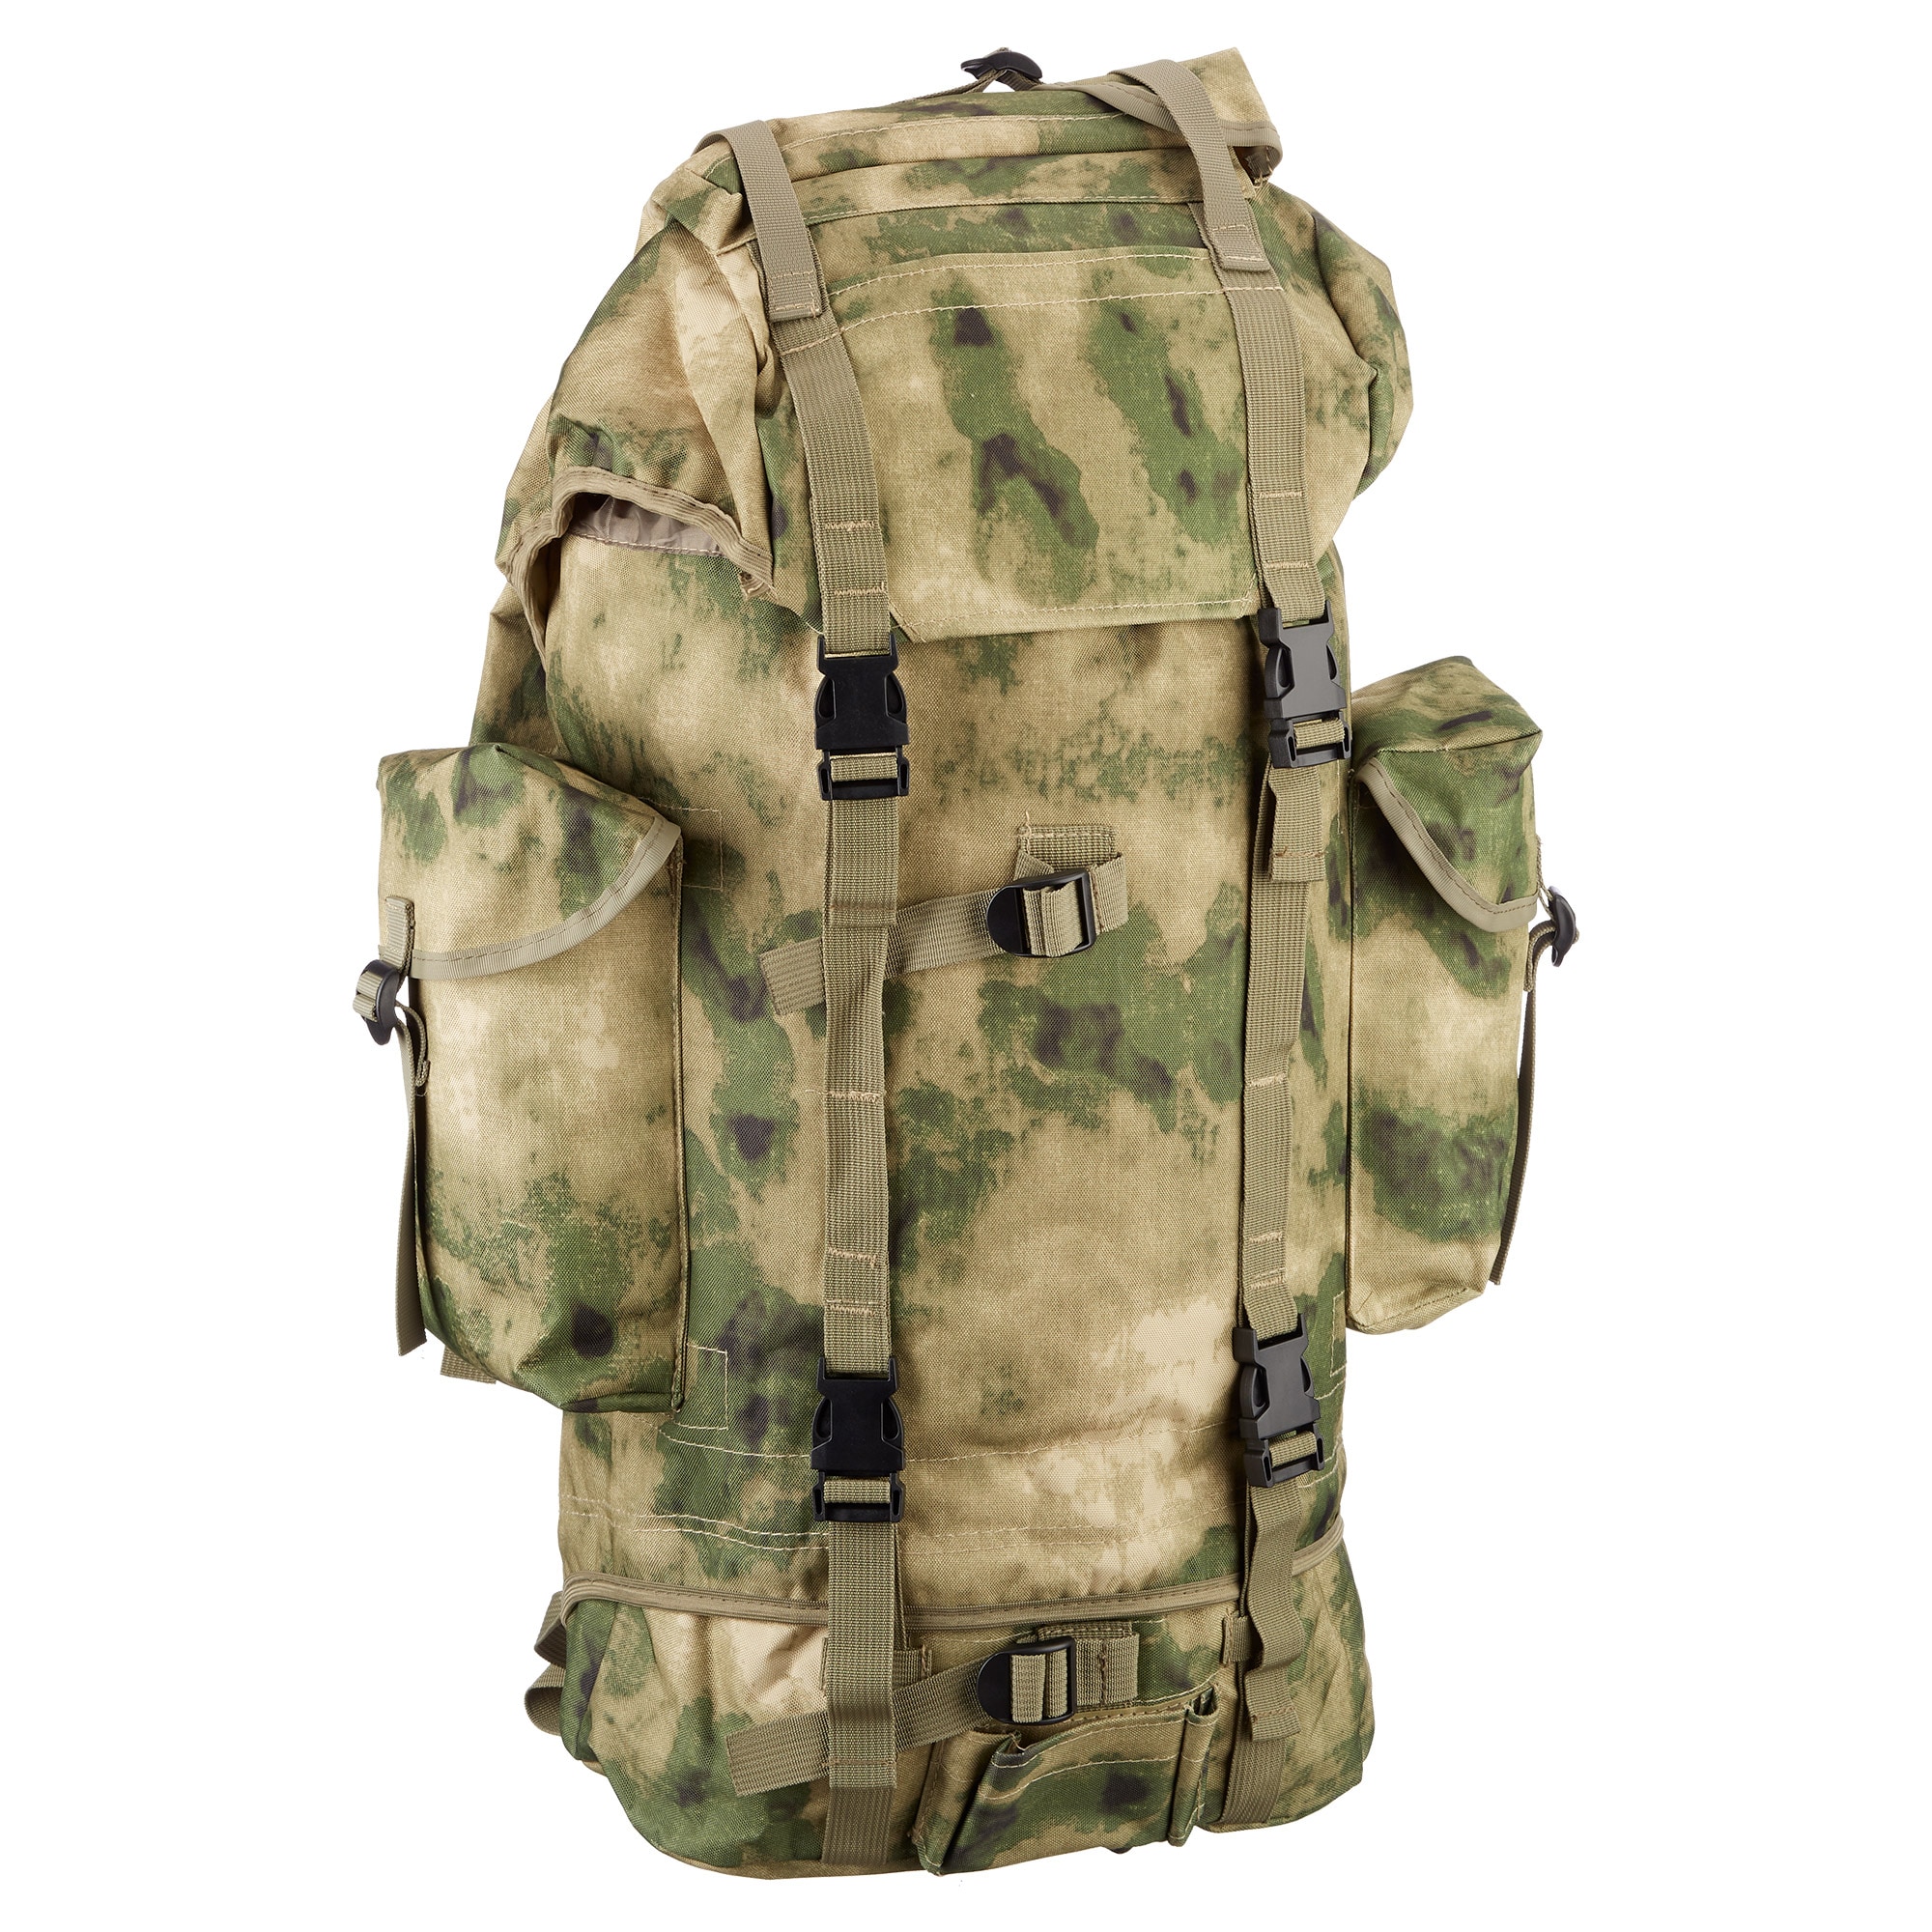 Purchase The German Combat Backpack 65 L Hdt Camo Fg By Asmc